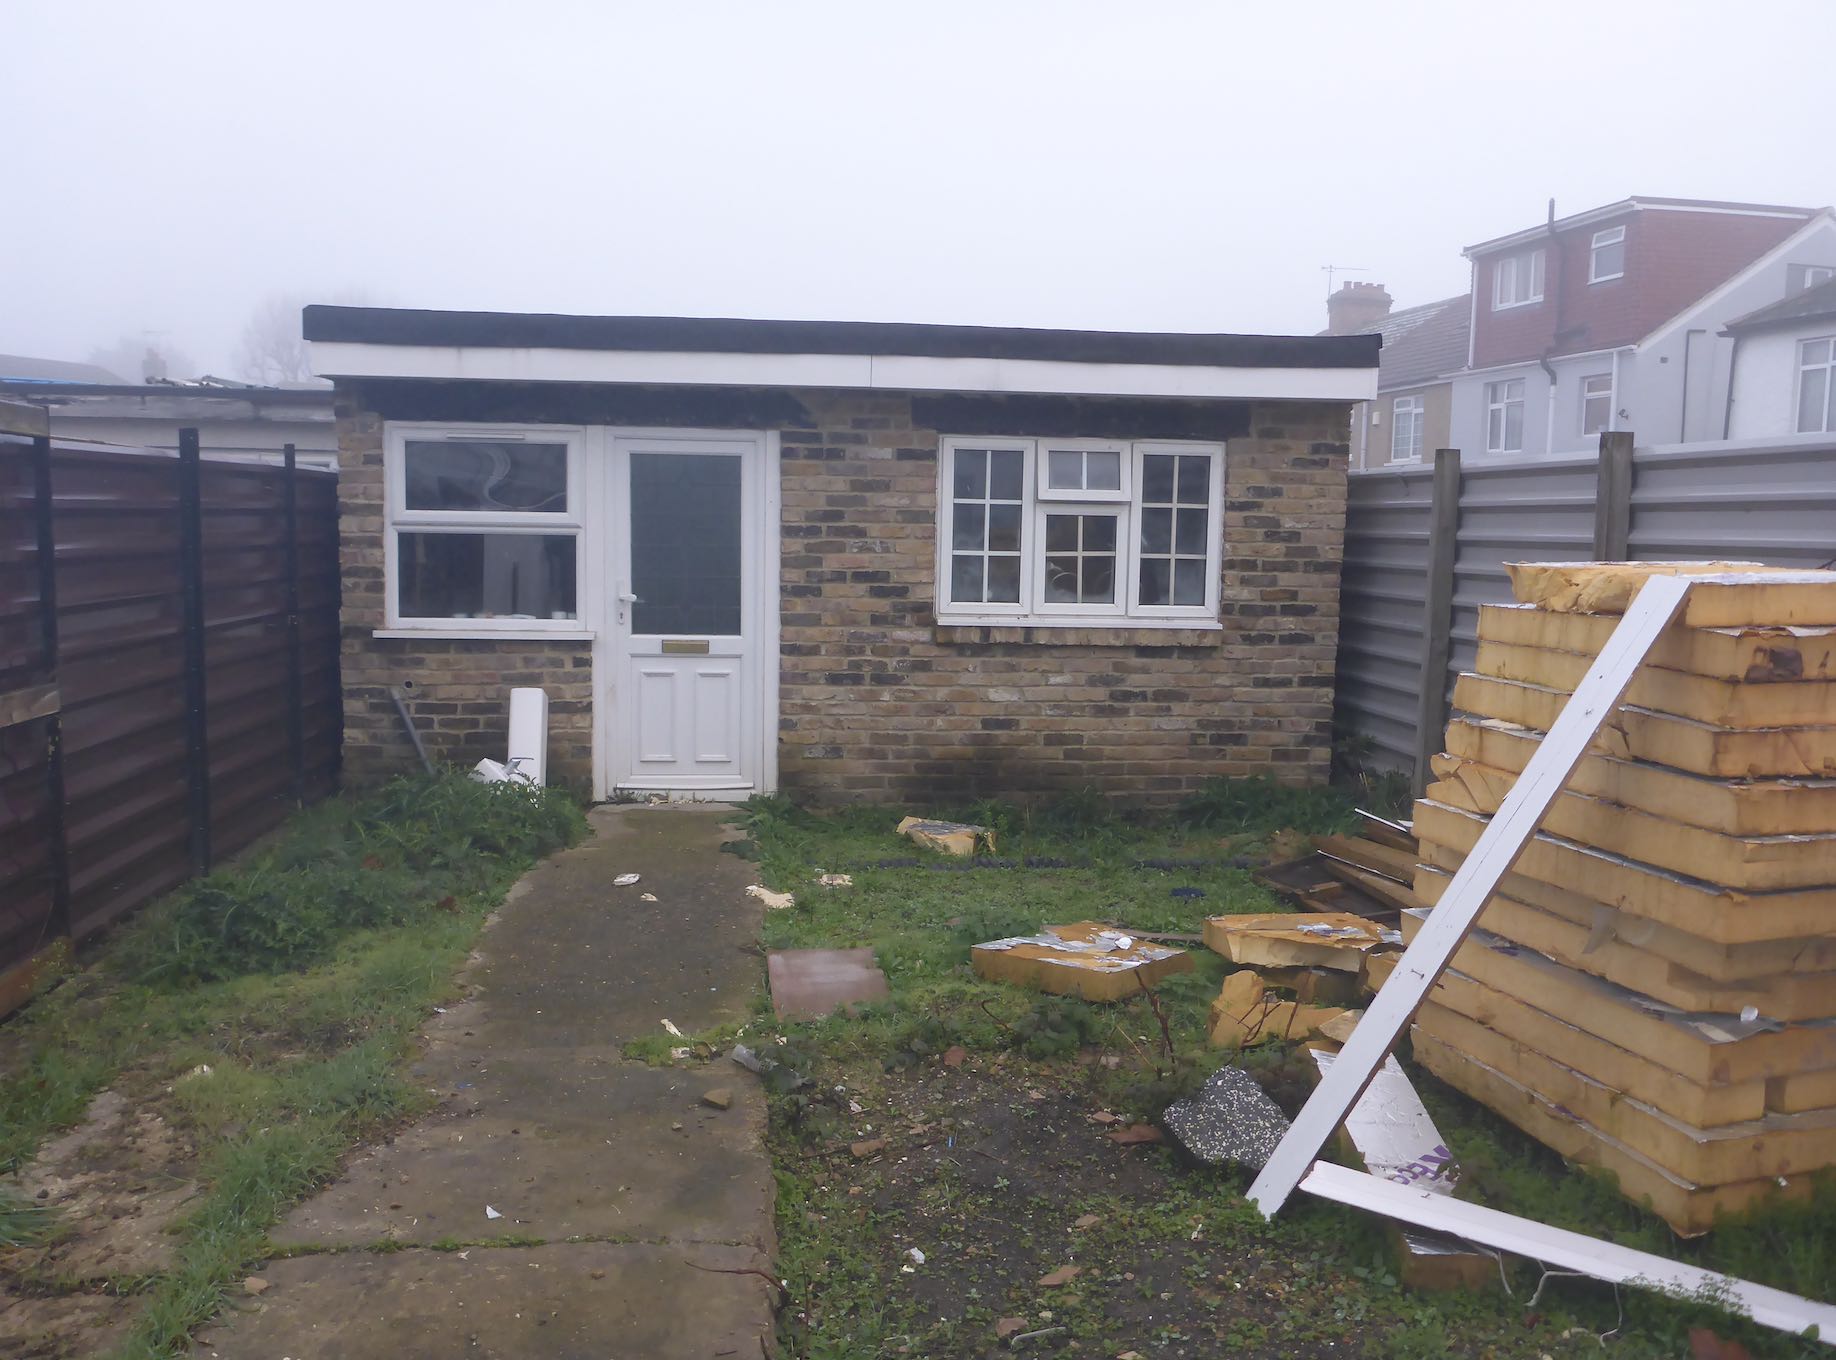 Illegal outbuilding demolished by Ealing Council 2019